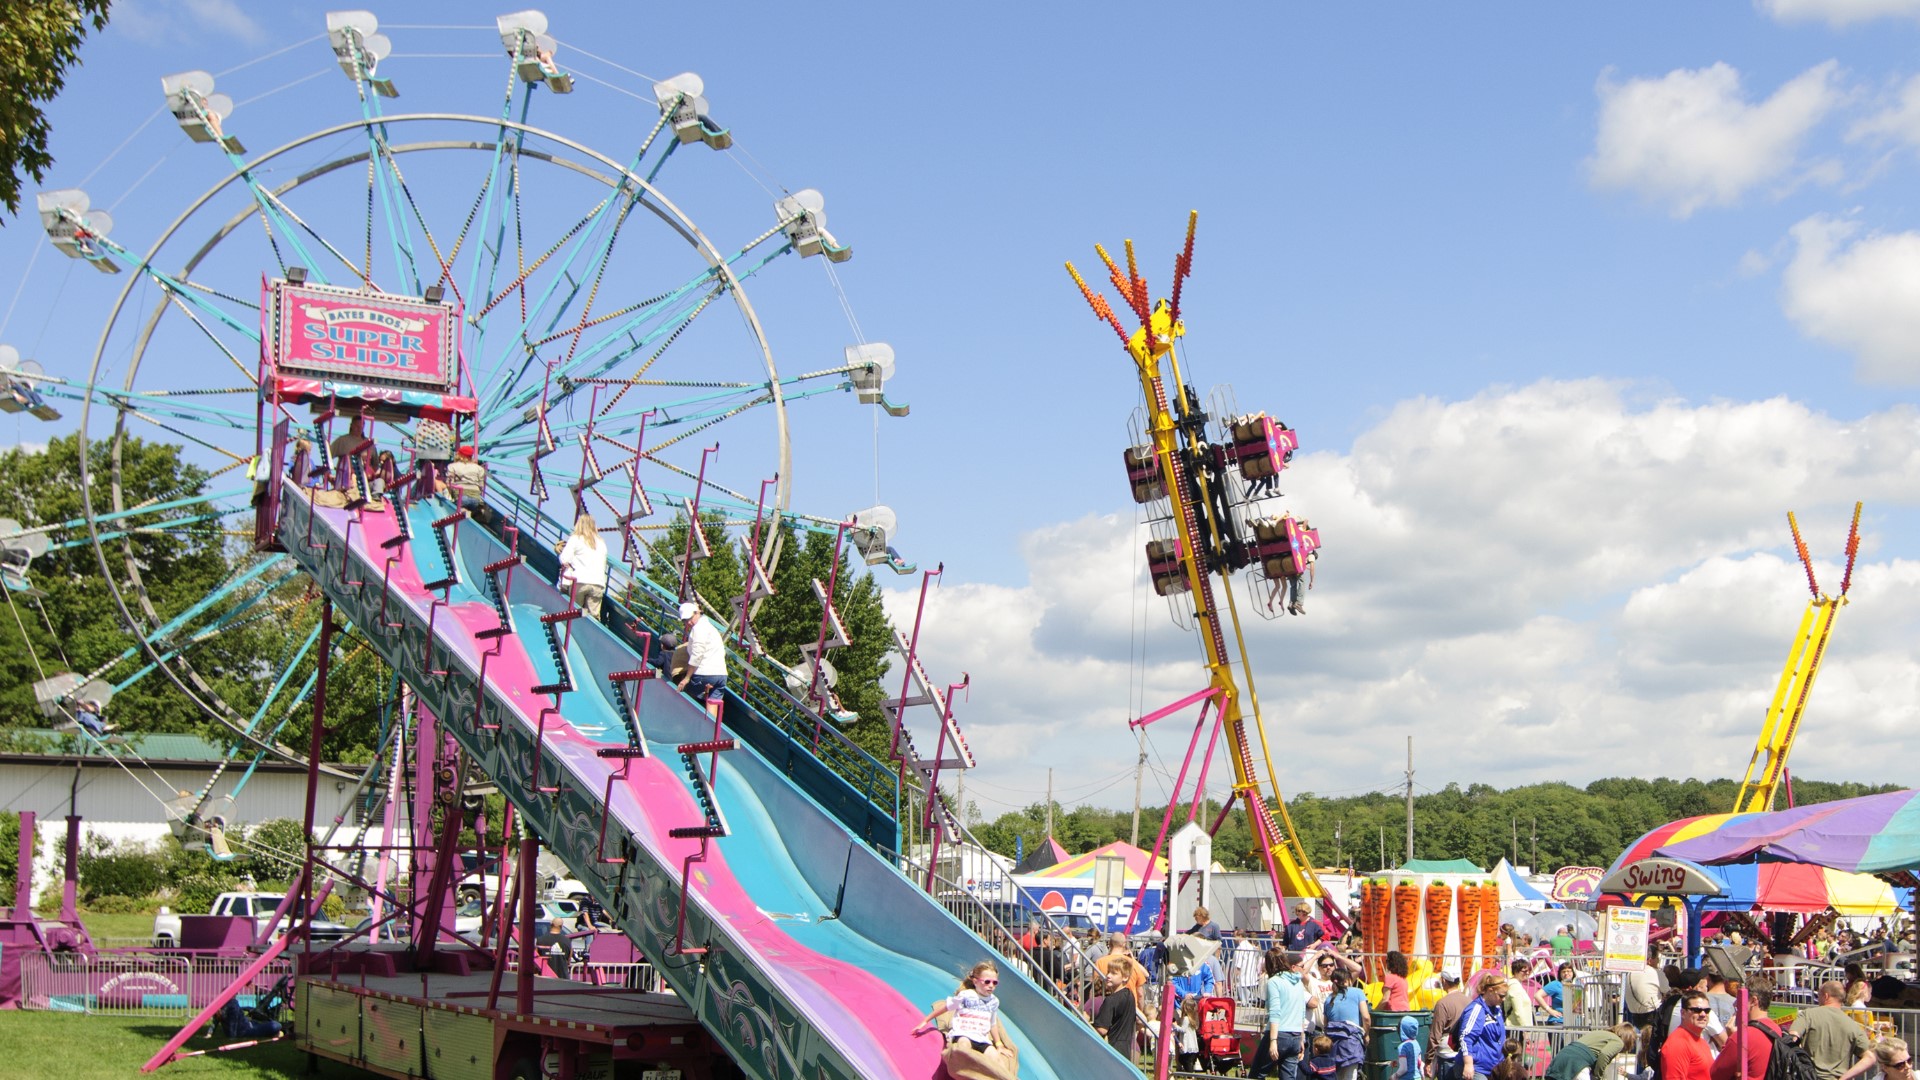 Fairs will be limited to junior fair events only starting on or after Friday, July 31.